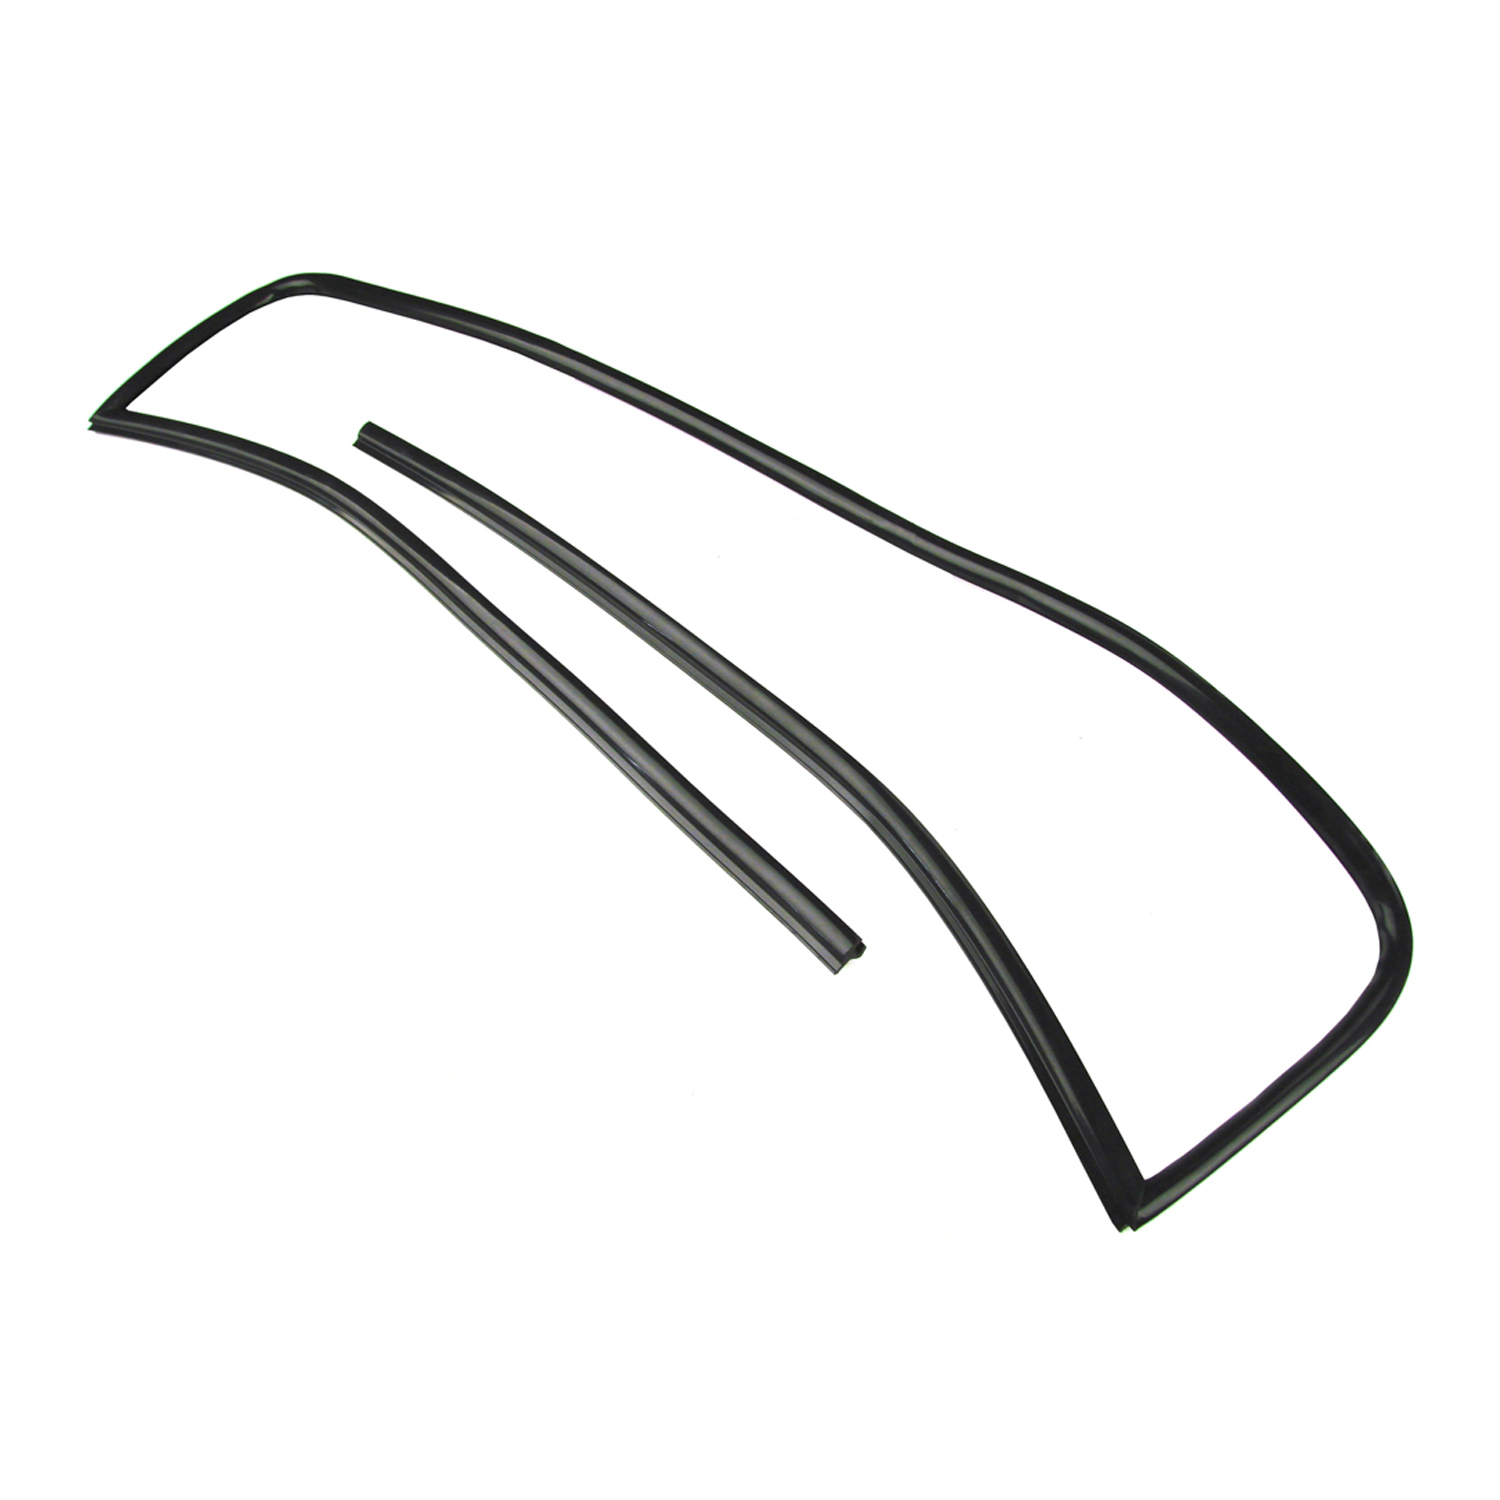 2000 Chevrolet Camaro Windshield Seal, 93-02 GM F Body Coupe Without T-Top Option, Each-VWS 1967-M